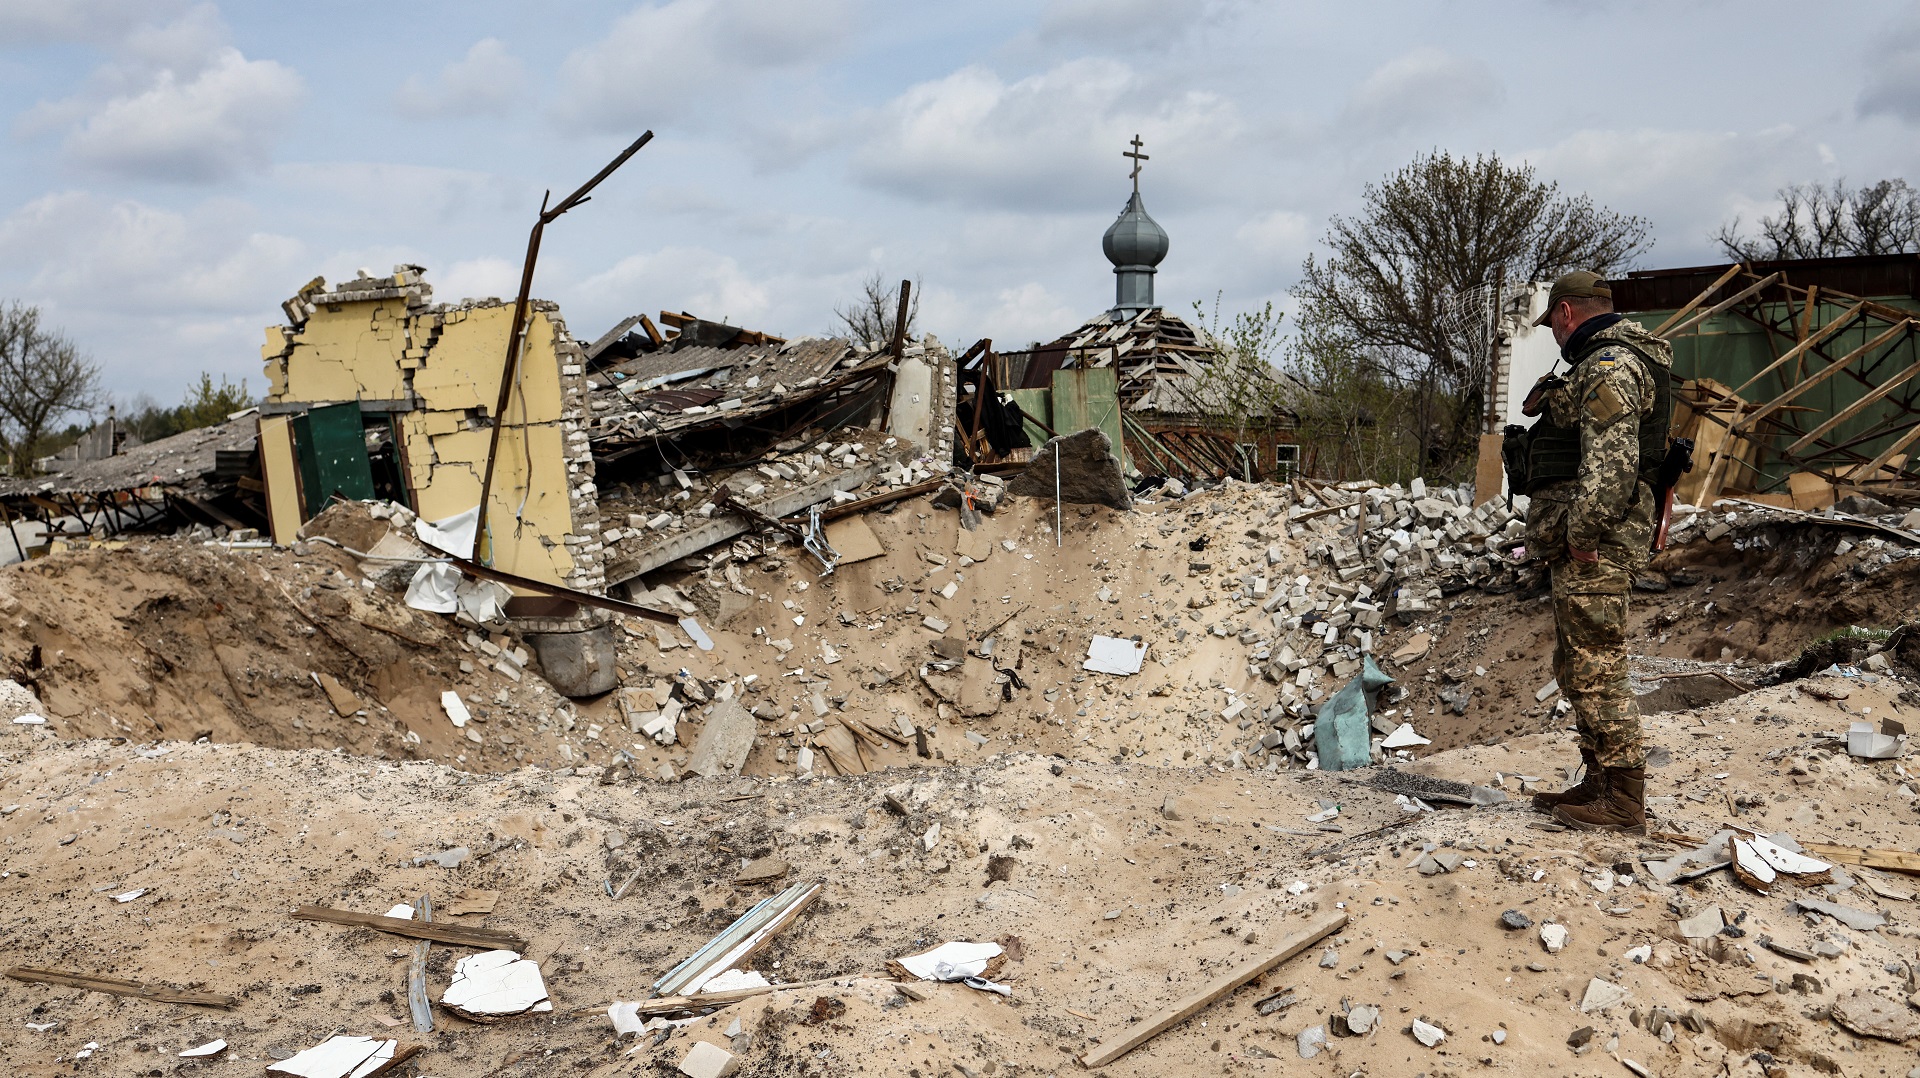 A Ukranian serviceman looks into a crater and a destroyed home are pictured in the village of Yatskivka, eastern Ukraine on April 16, 2022. - Russia's military focus now seems to be on seizing the eastern Donbas region, where Russian-backed separatists control the Donetsk and Lugansk areas. Lugansk governor Serhiy Gaidai called on April 16, 2022, for civilians to leave the area while they still can. (Photo by RONALDO SCHEMIDT / AFP)